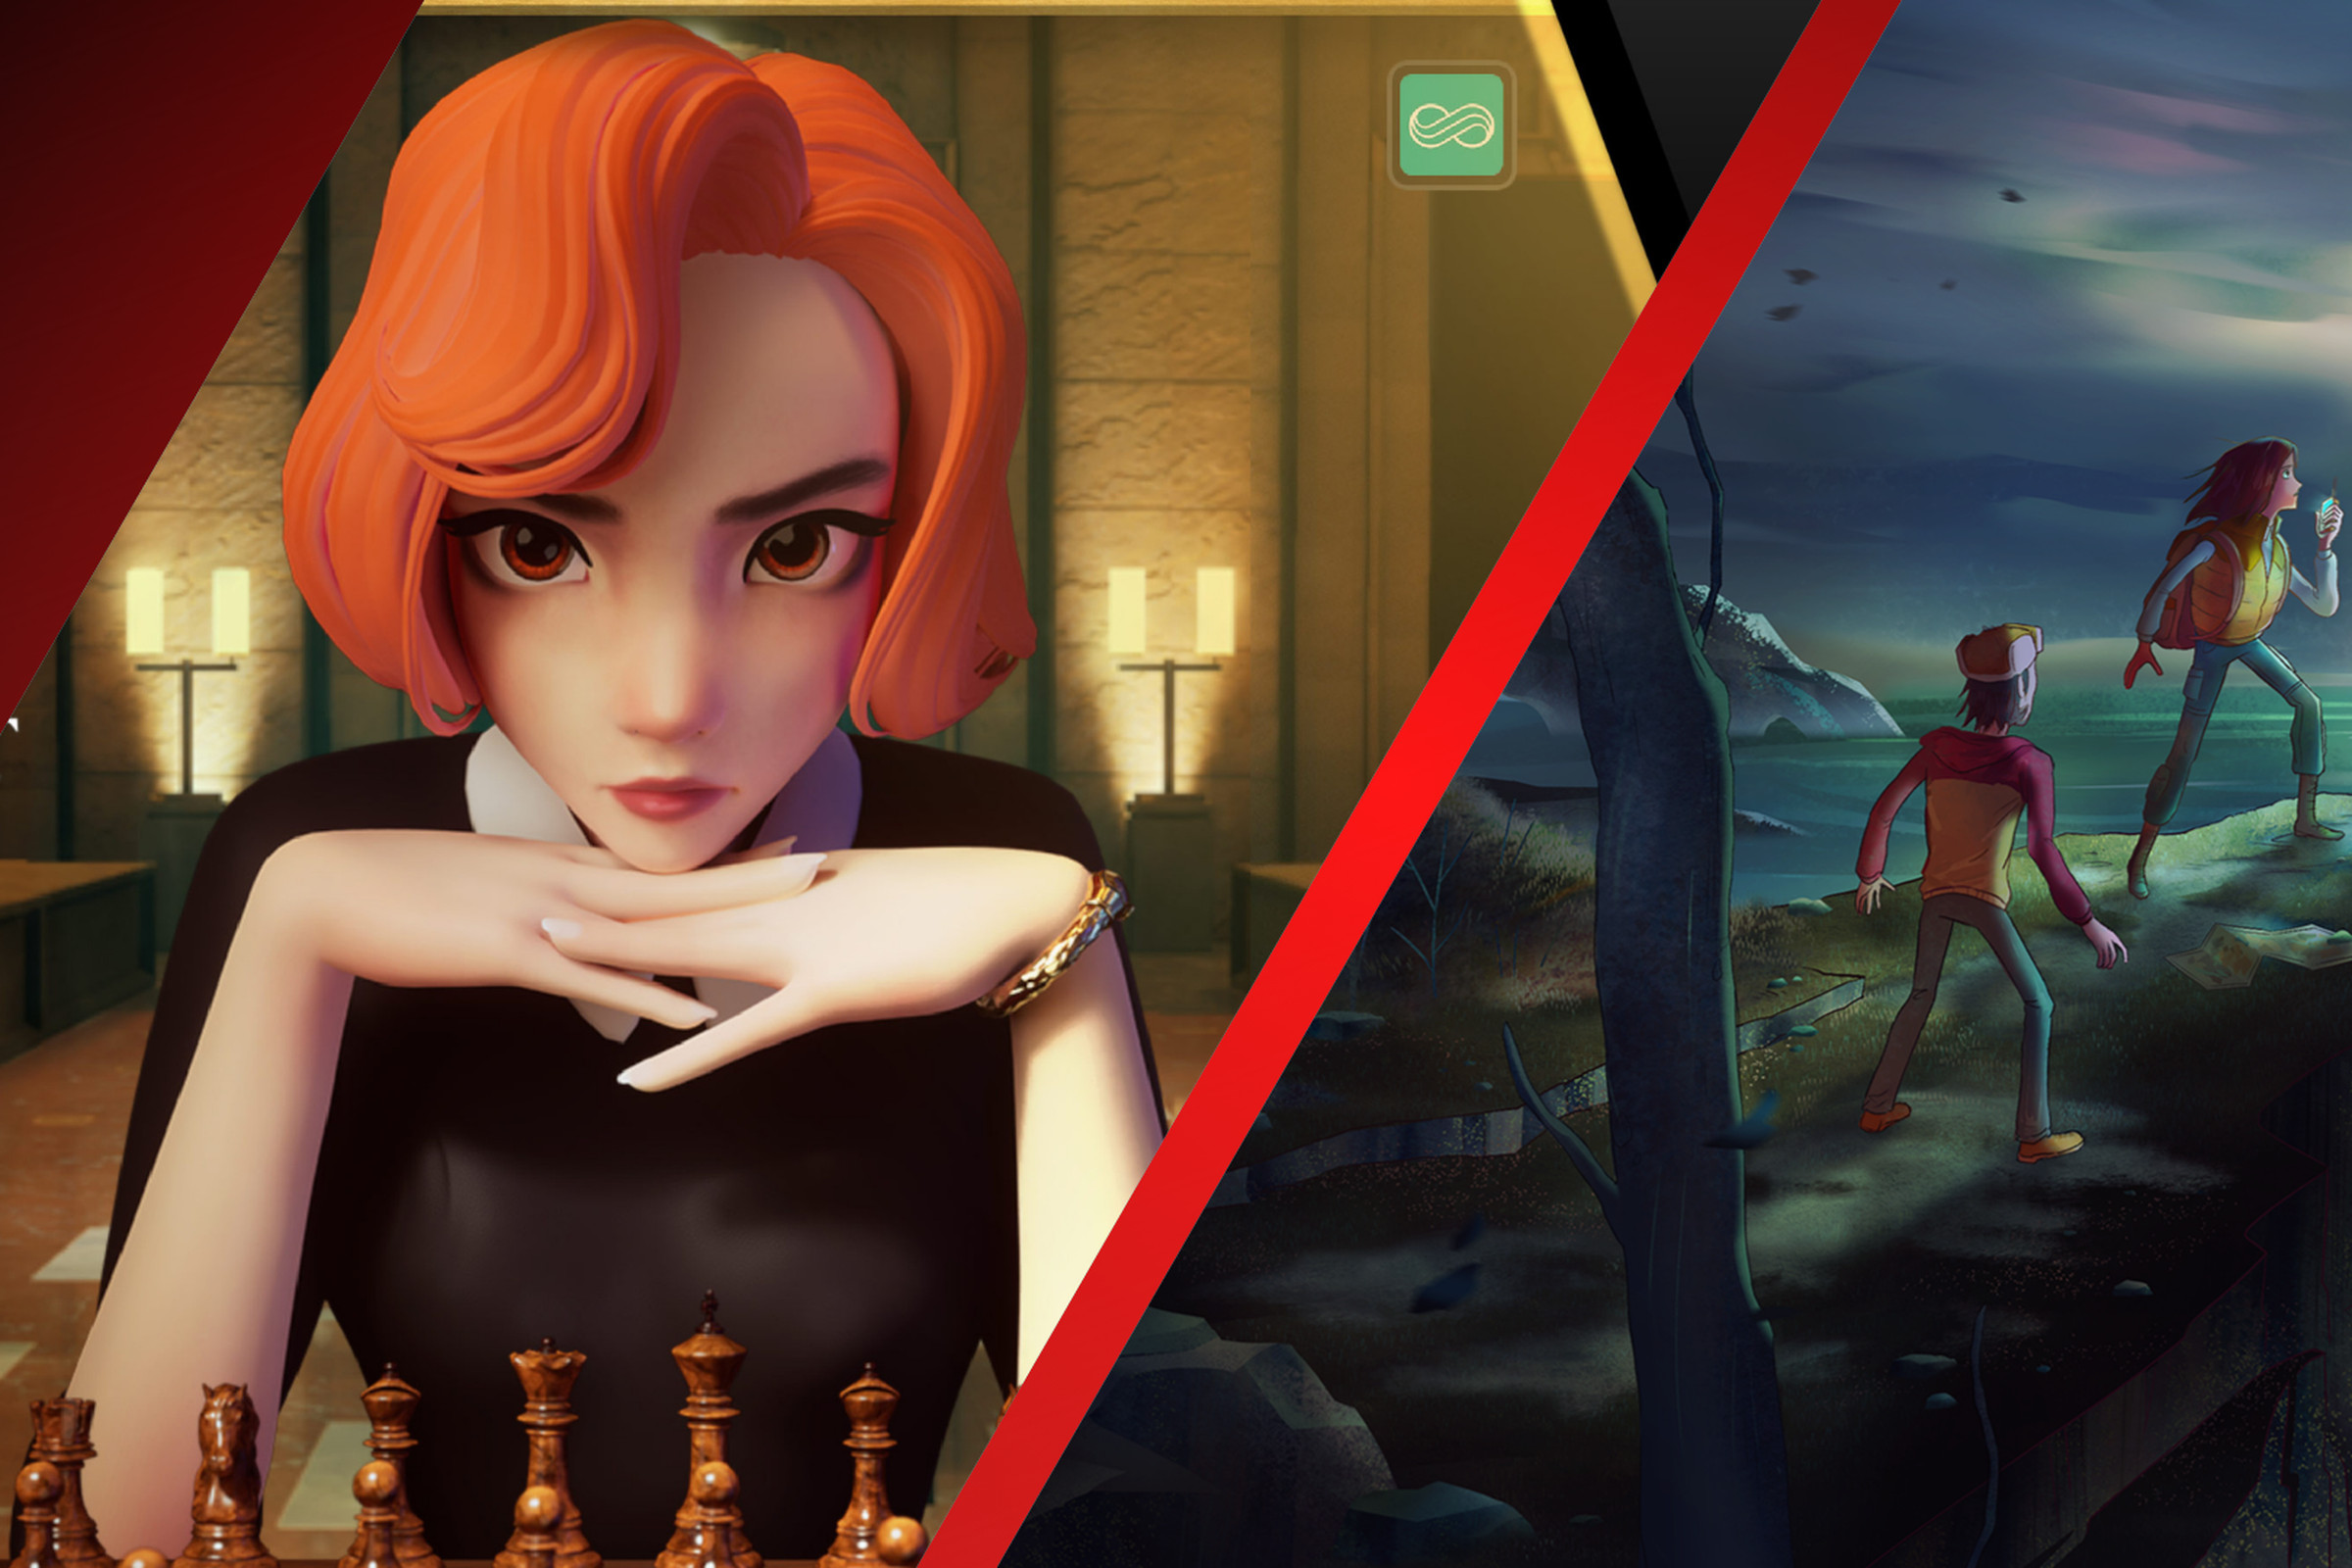 Key art from The Queen’s Gambit Chess and Oxenfree II: Lost Signals featuring a side-by-side split of art from both games against a red and black gradient background